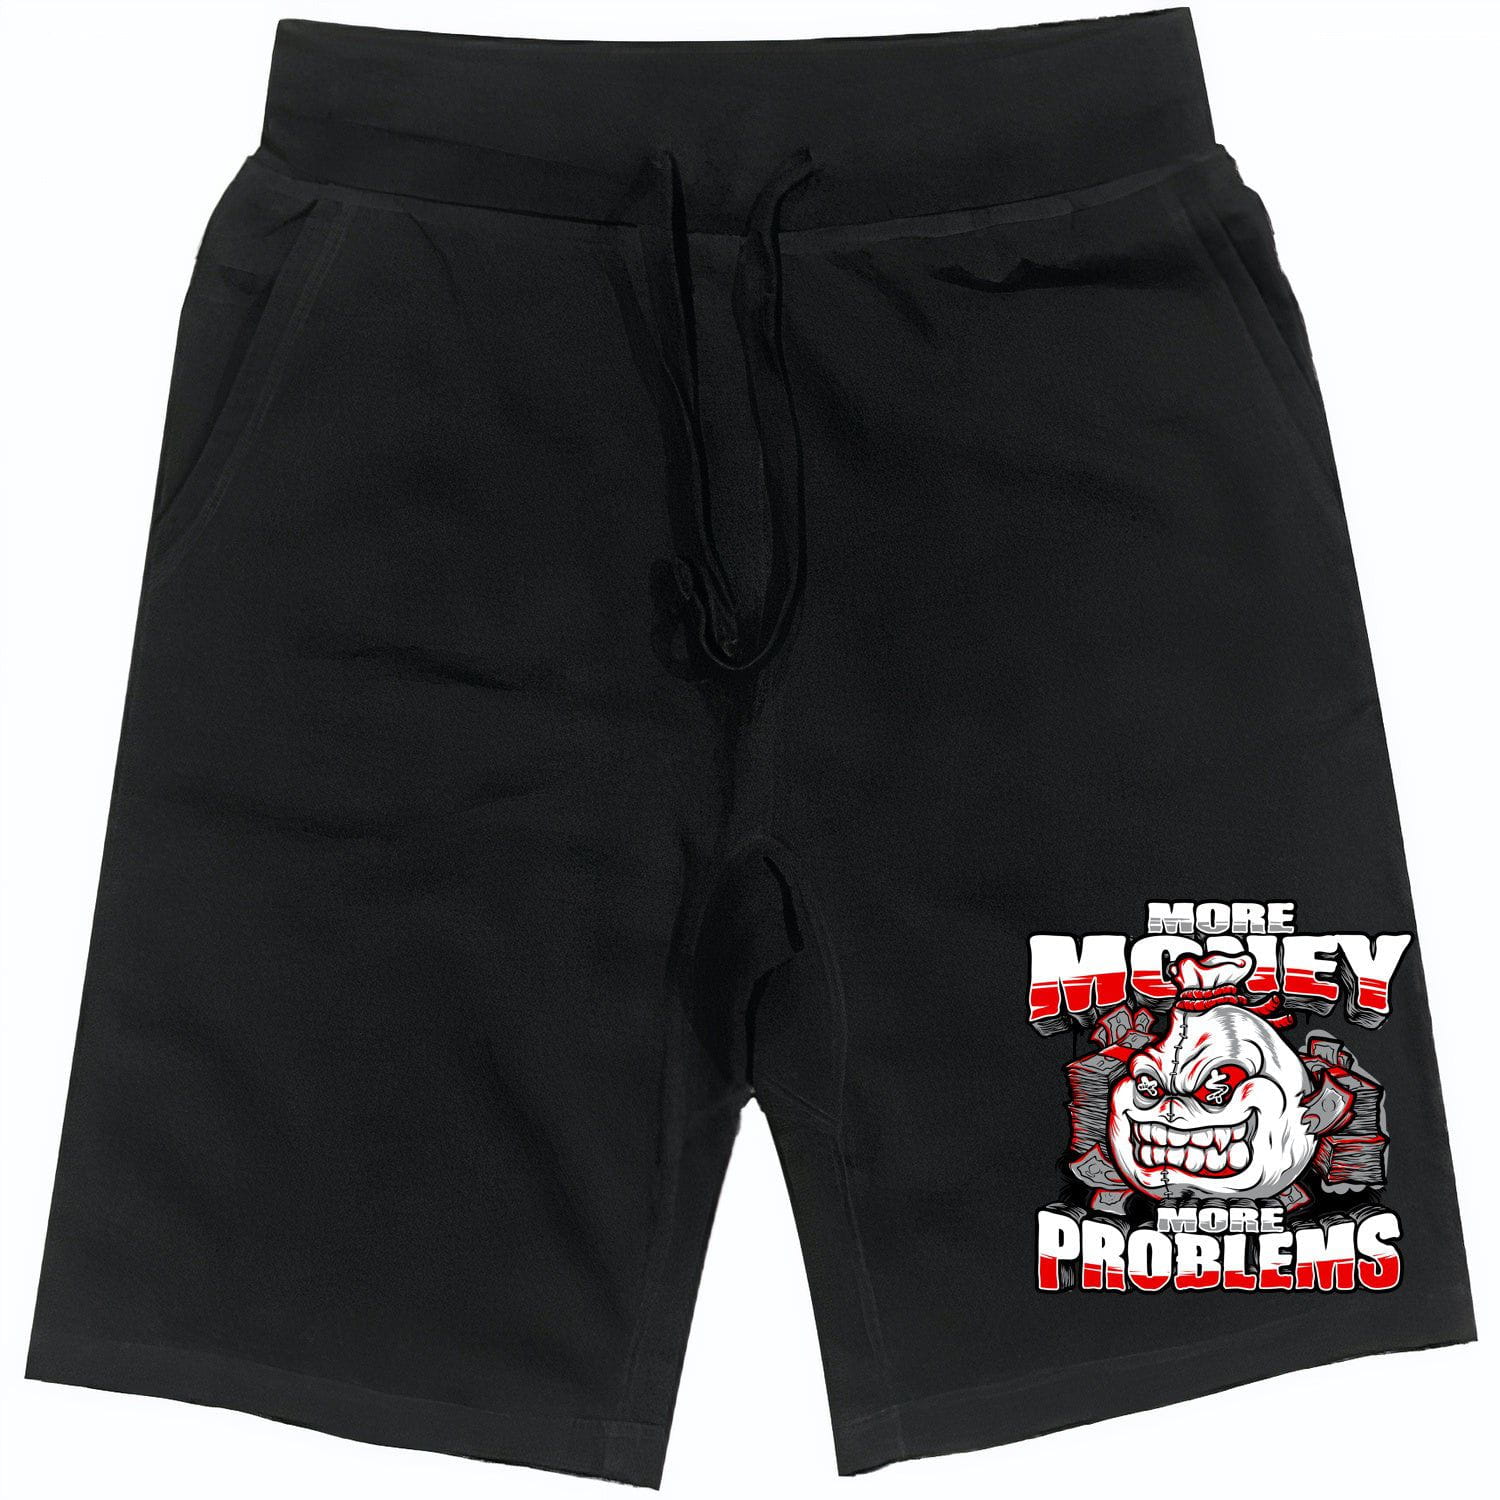 RED MORE PROBLEMS : Black Cotton Terry Fleece Shorts